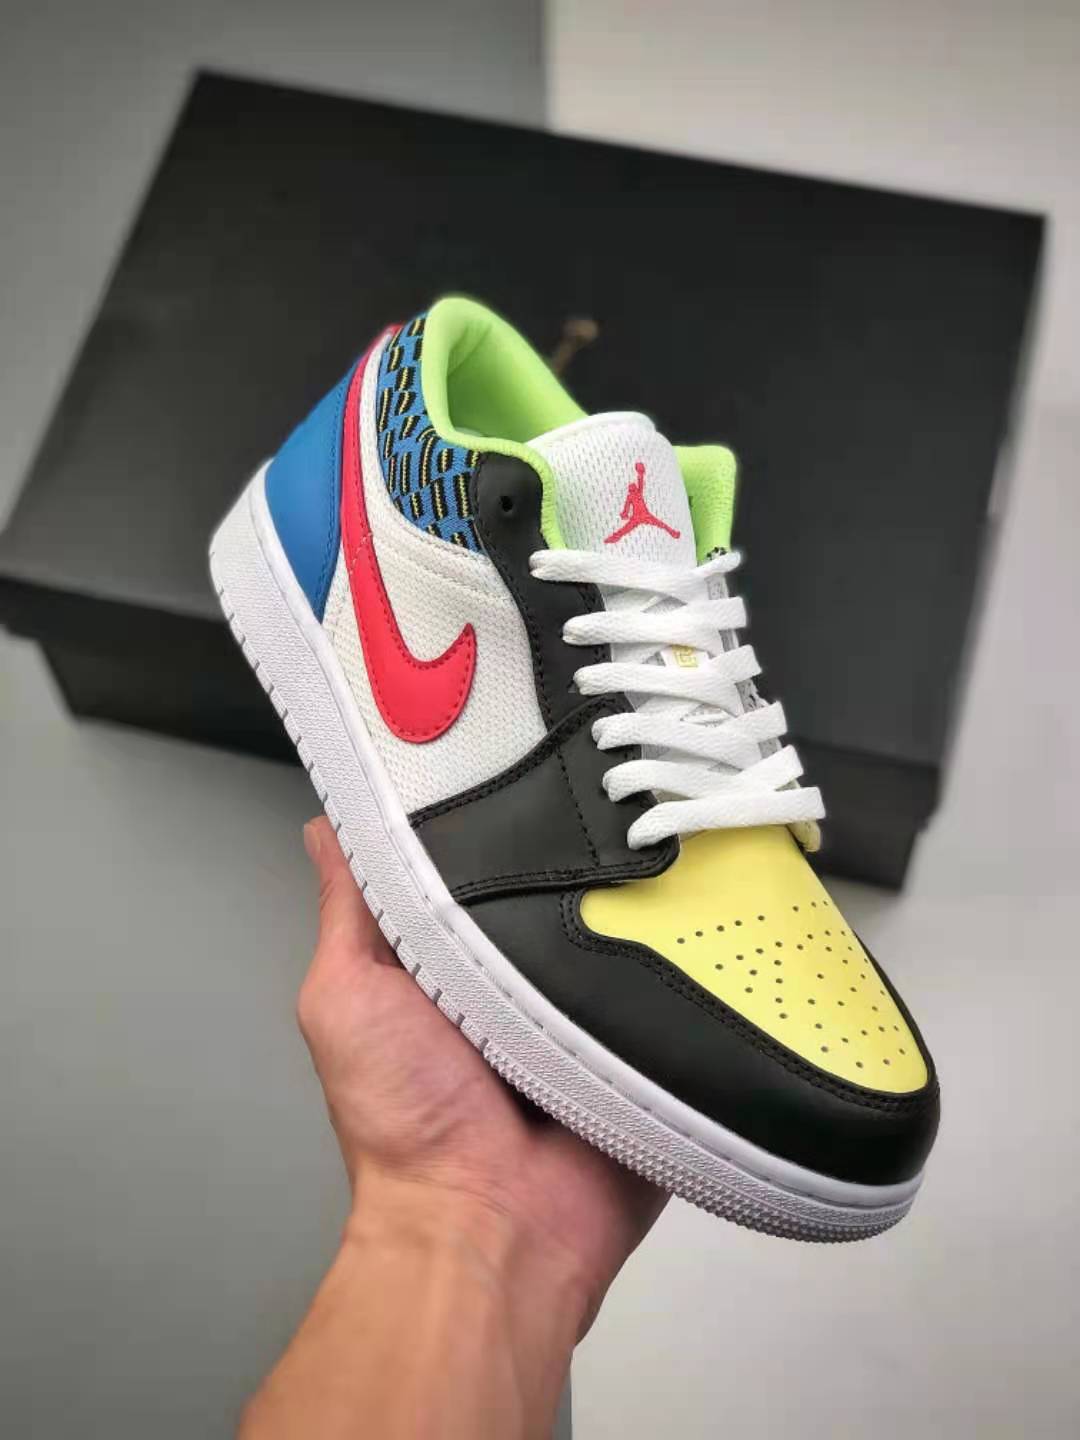 Air Jordan 1 Low 'Funky Patterns' DH5927-006 - Unique and Stylish Sneakers